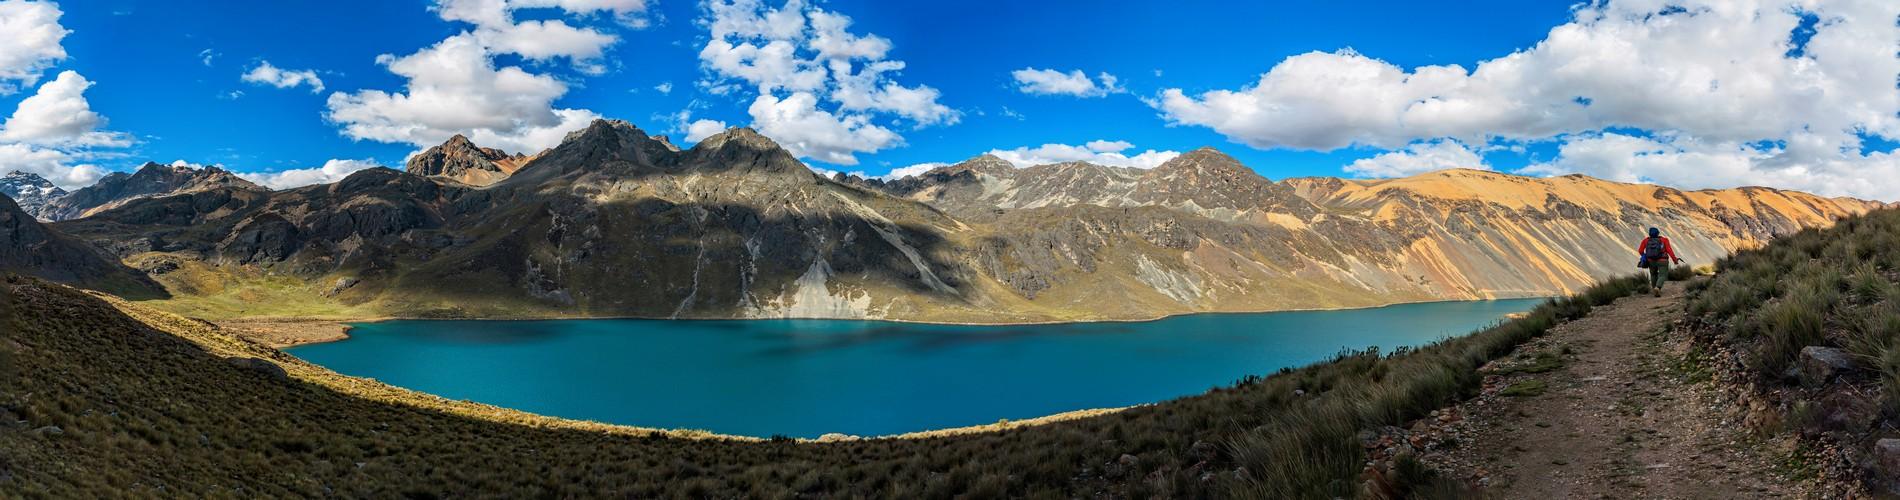 Extreme Sports and Trekking Adventures In Peru